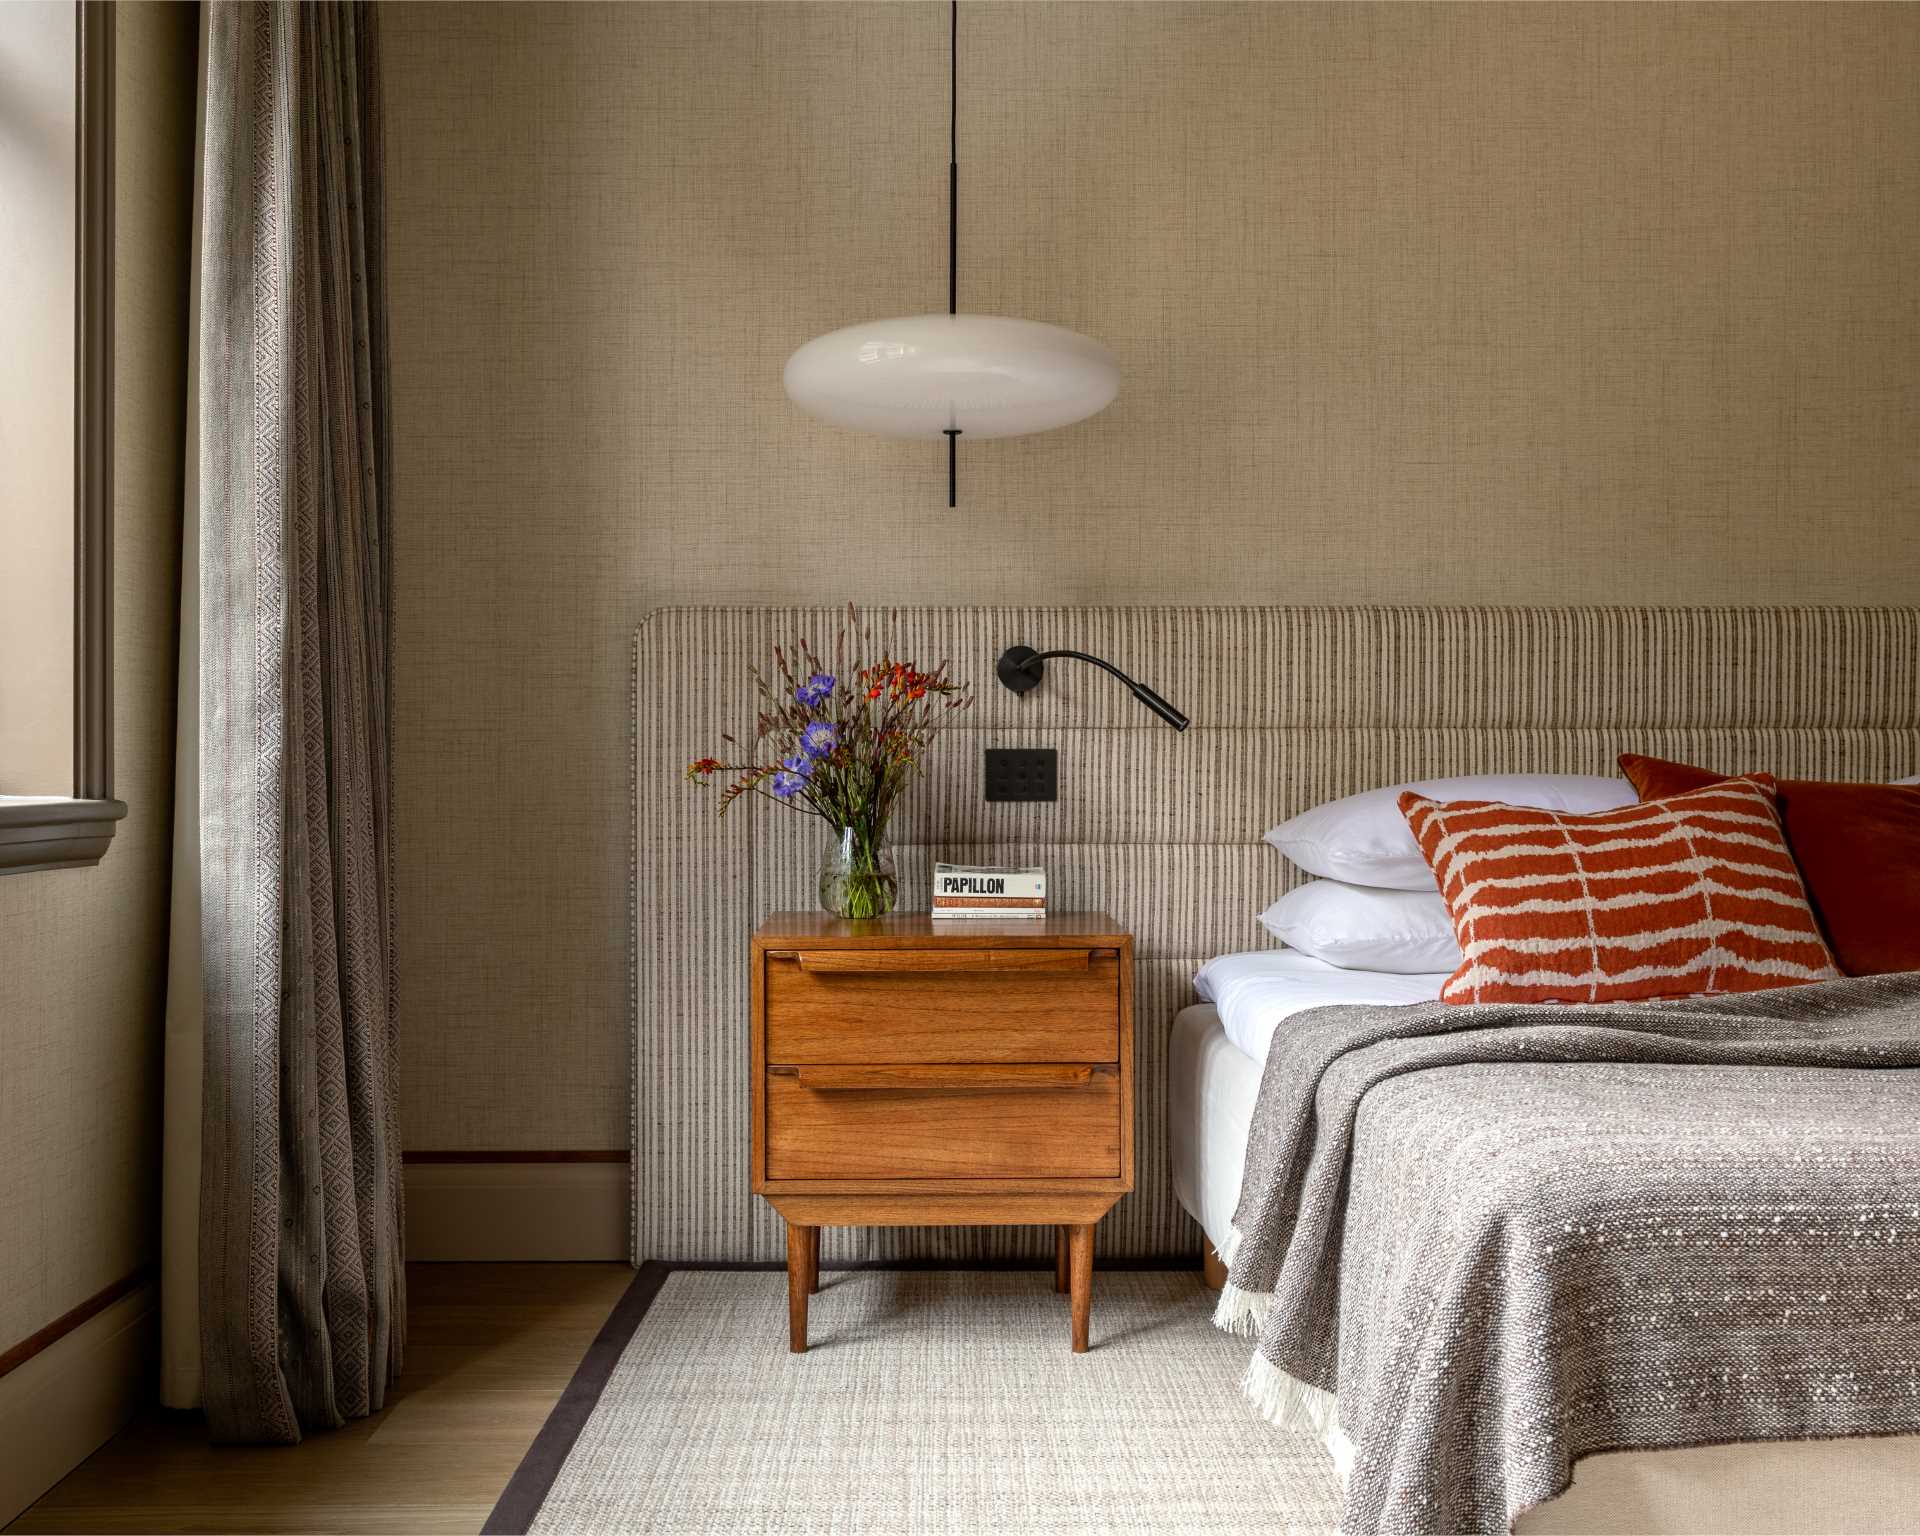 In this contemporary bedroom, there's a neutral palette with pops of color.